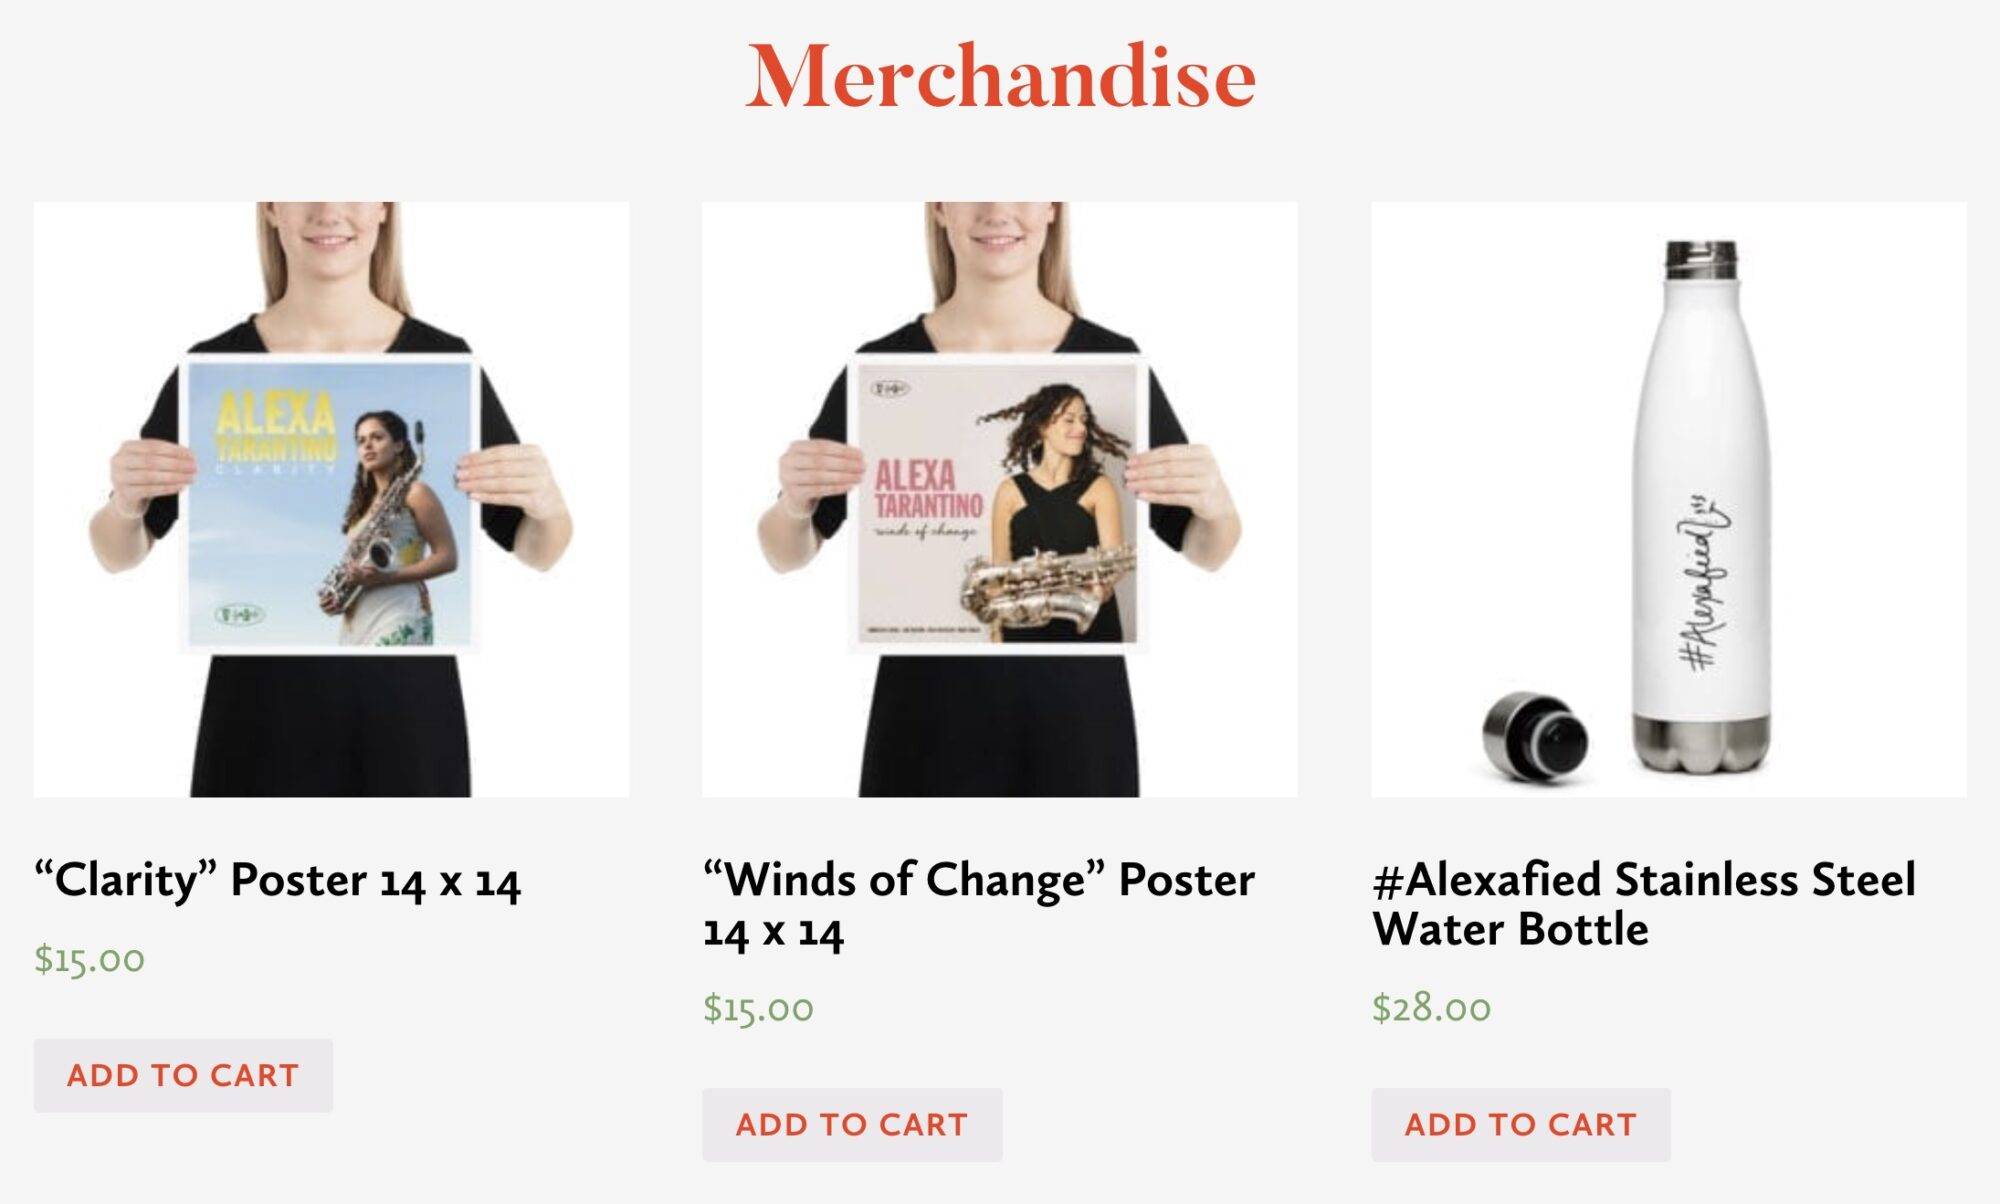 Branded merch products for sale on a website